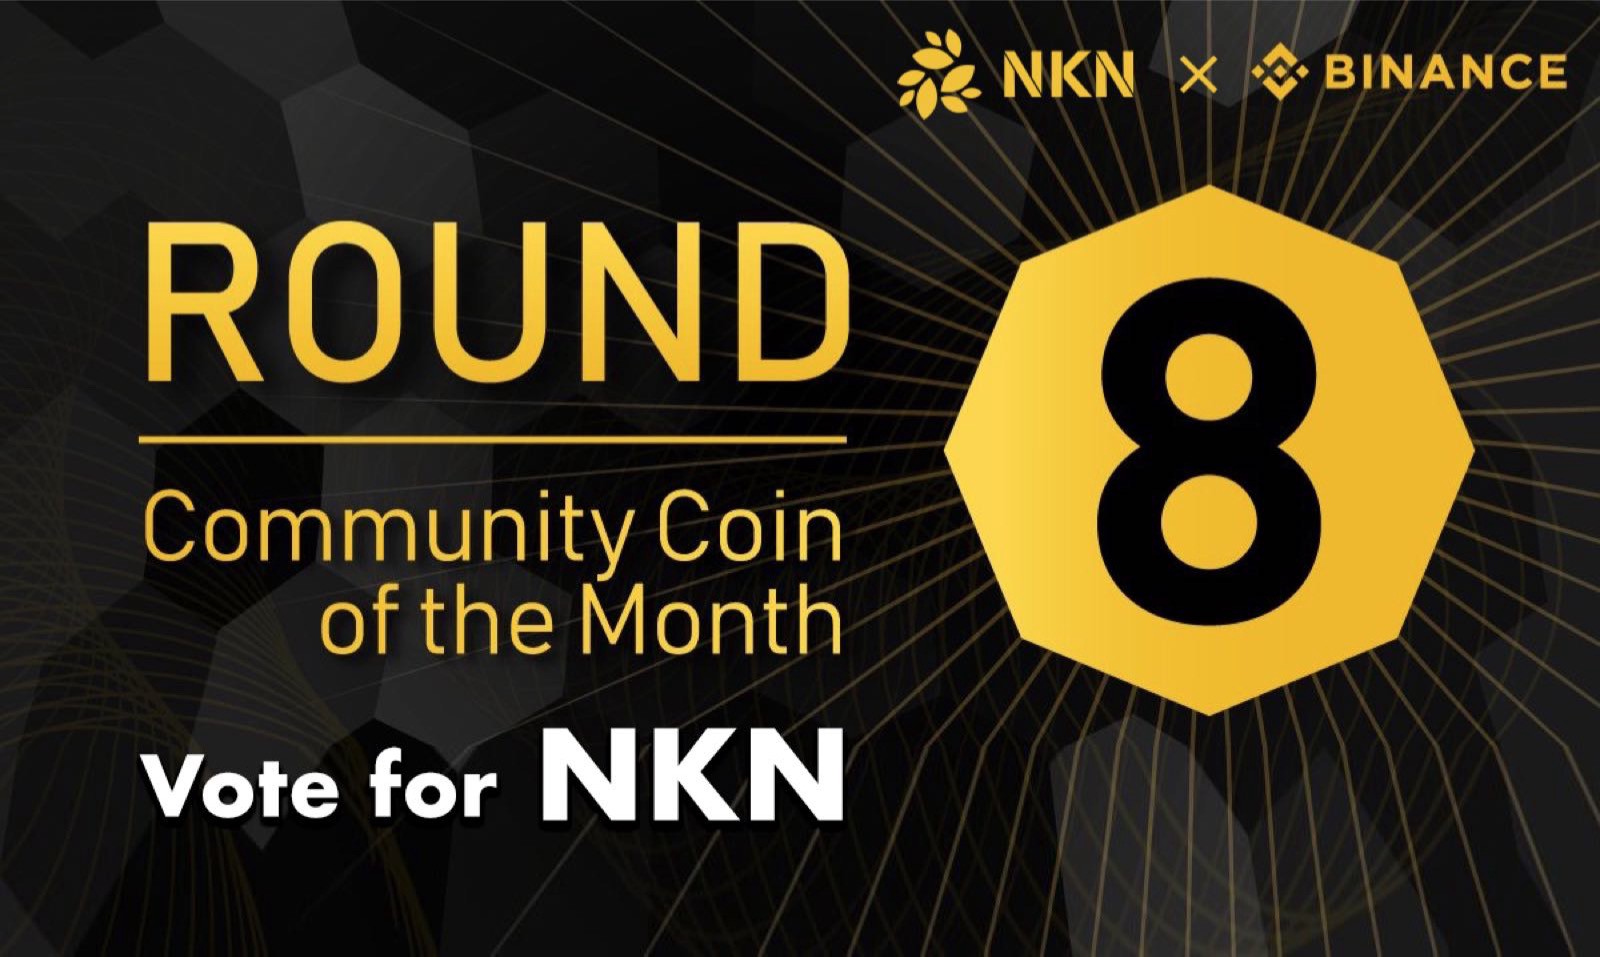 Community Coin of the Month